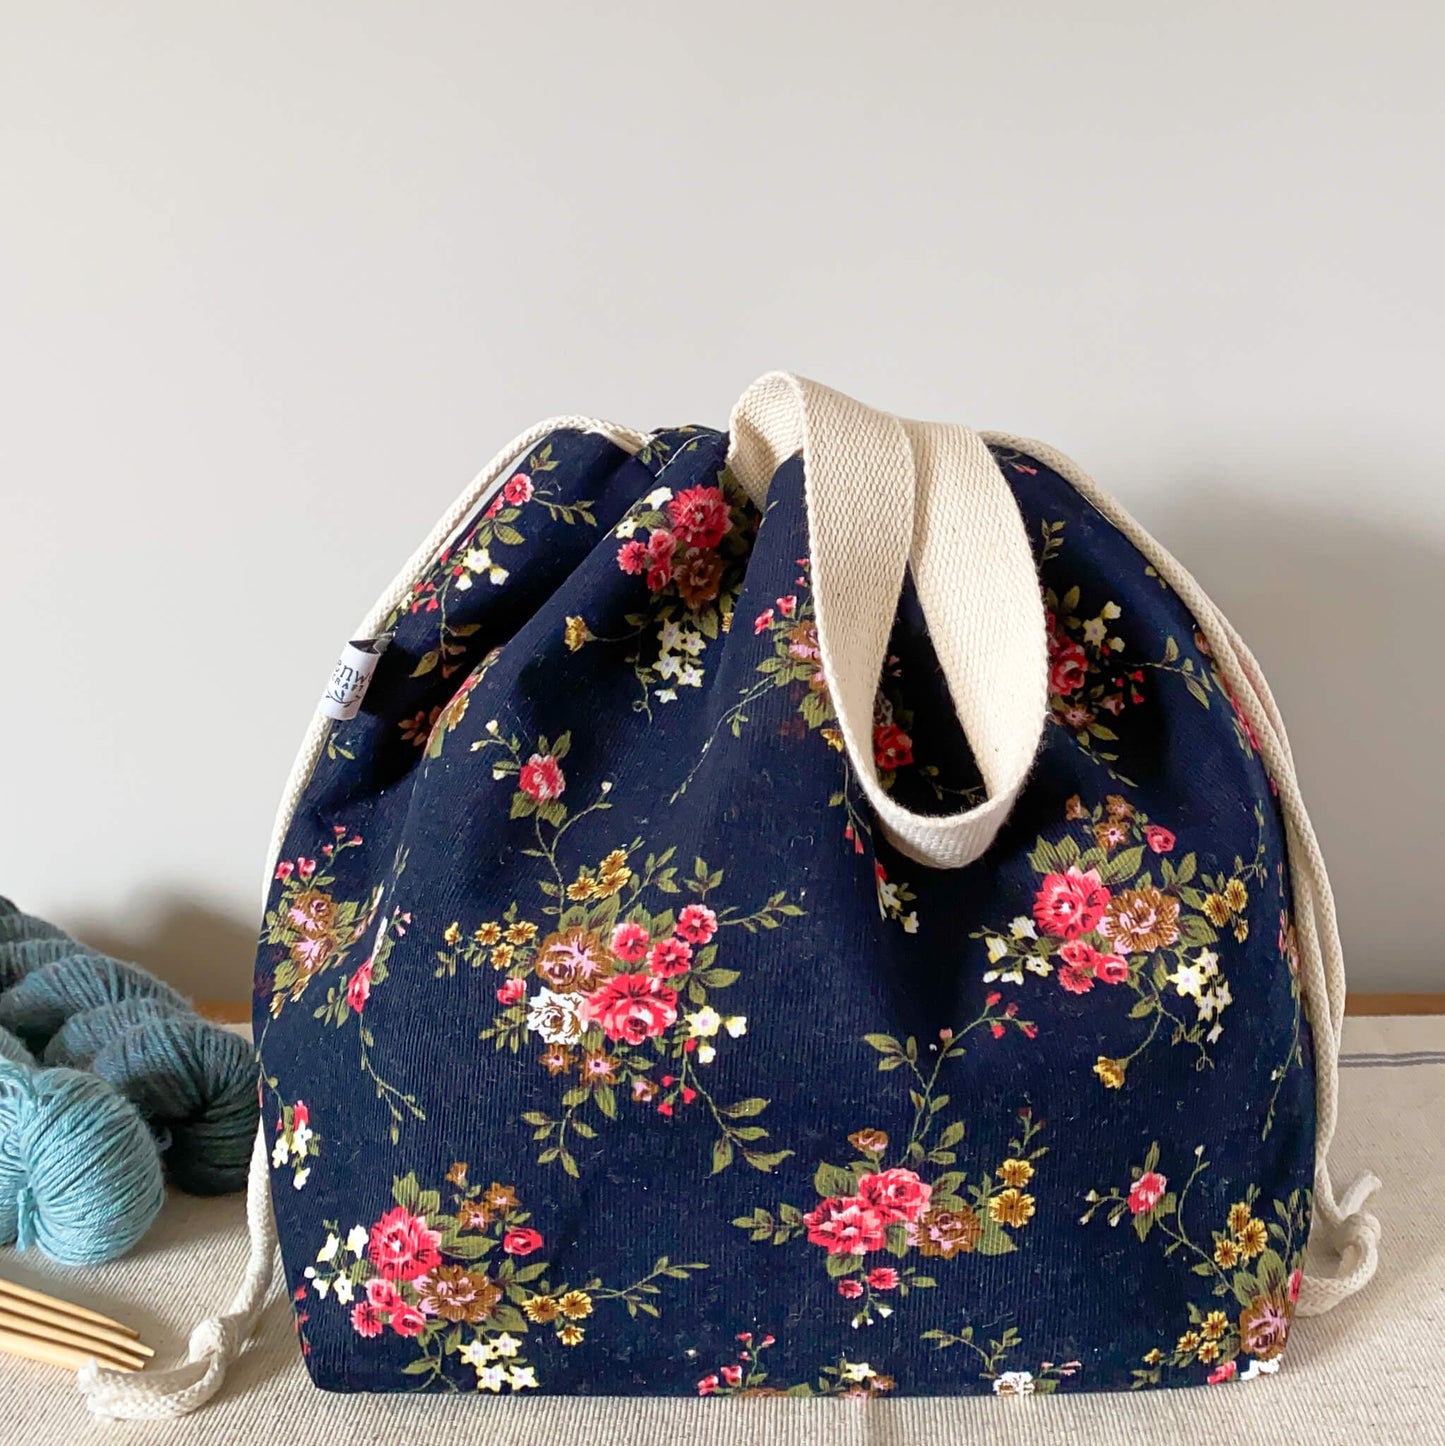 A pretty floral knitting project bag sits on a table next to two skeins of yarn and some wooden knitting needles. The bag is pulled closed hiding the contents. 